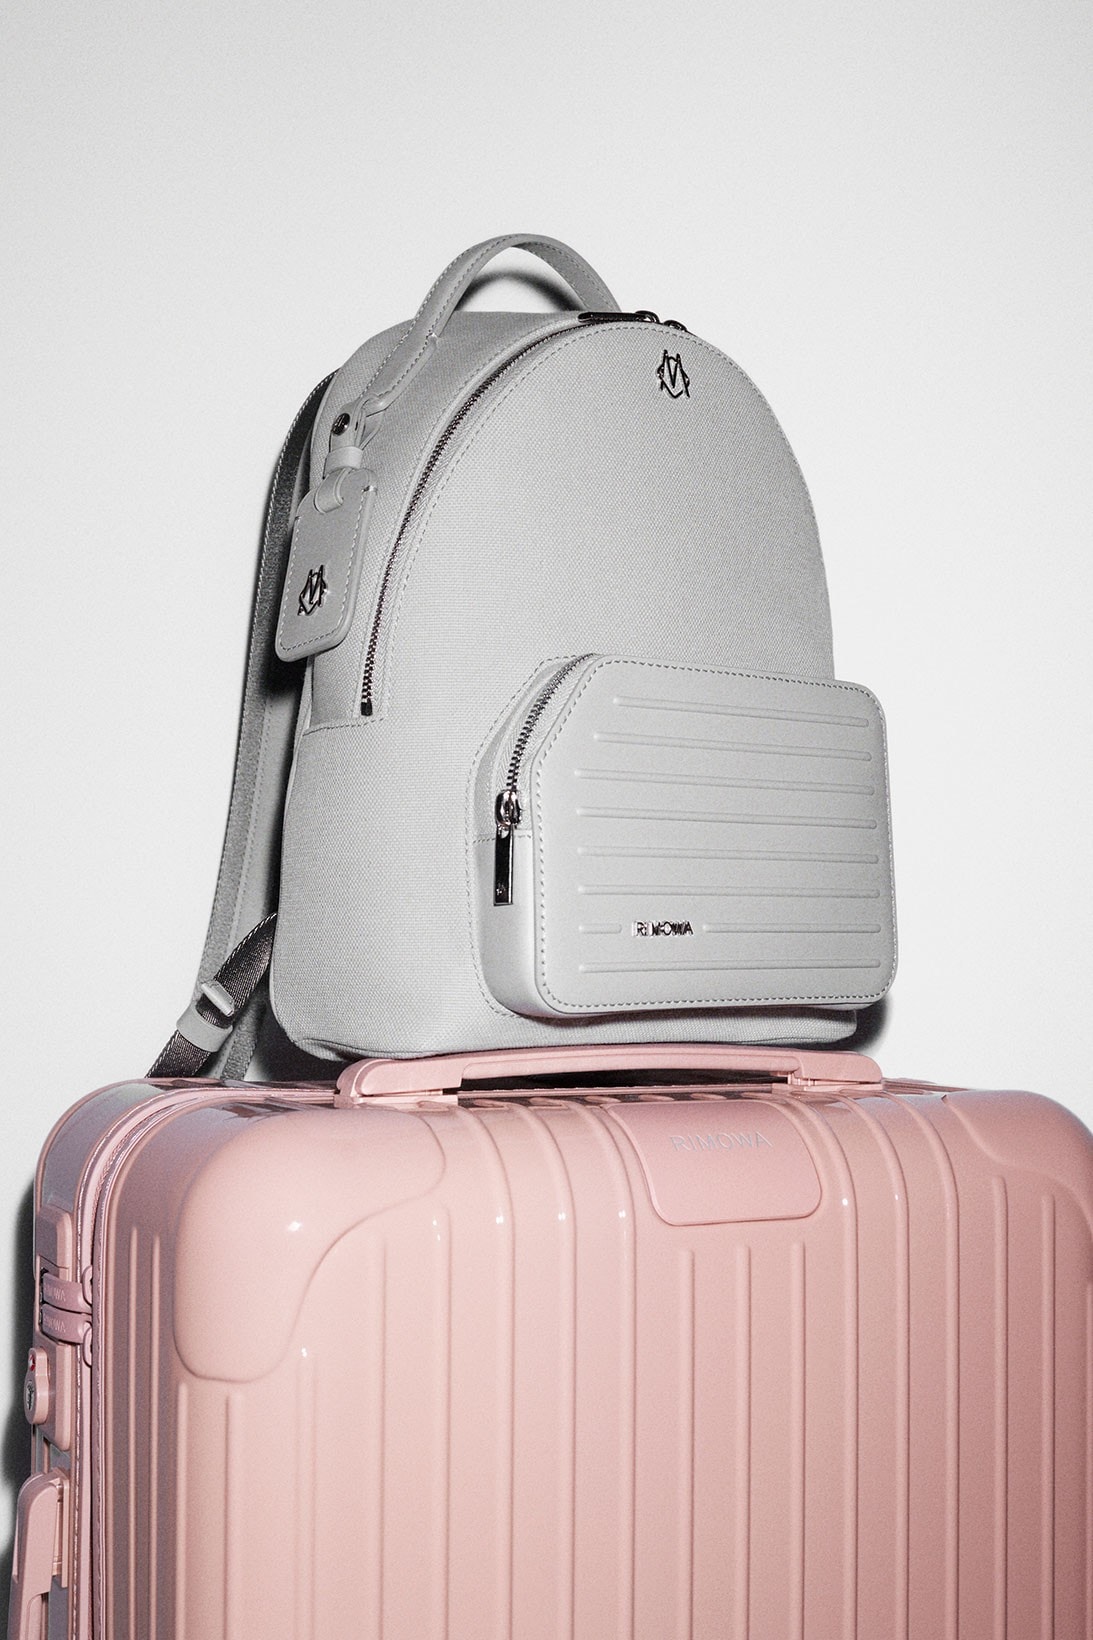 rimowa never still handbags backpacks totes collection price release